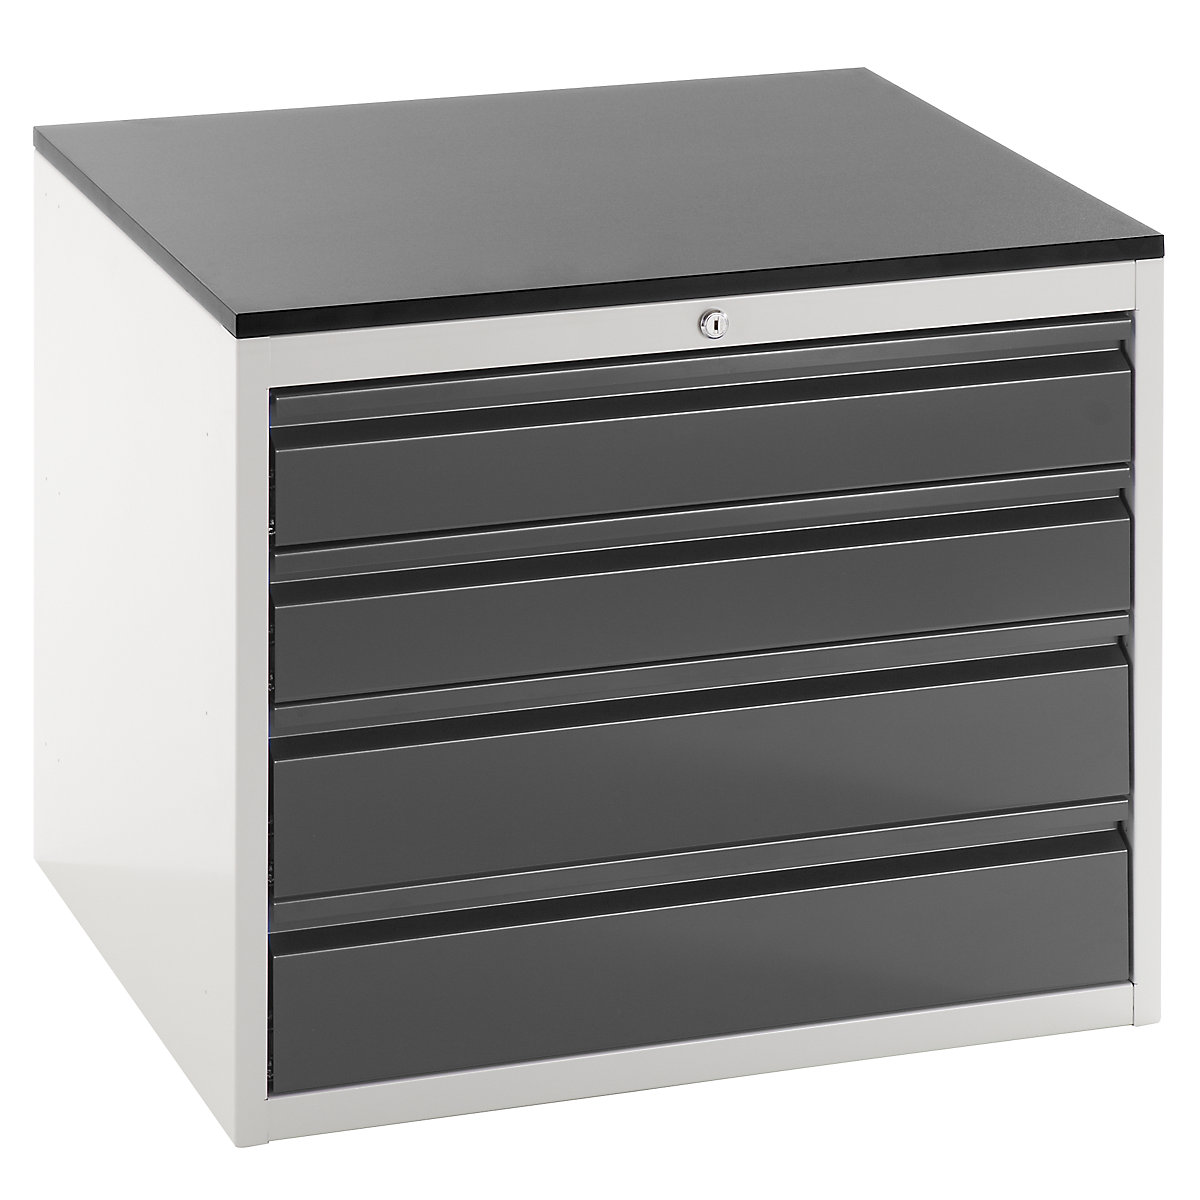 Drawer cupboard with telescopic guides – RAU, height 640 mm, drawers: 2 x 120, 2 x 150 mm, light grey / charcoal, width 770 mm-6